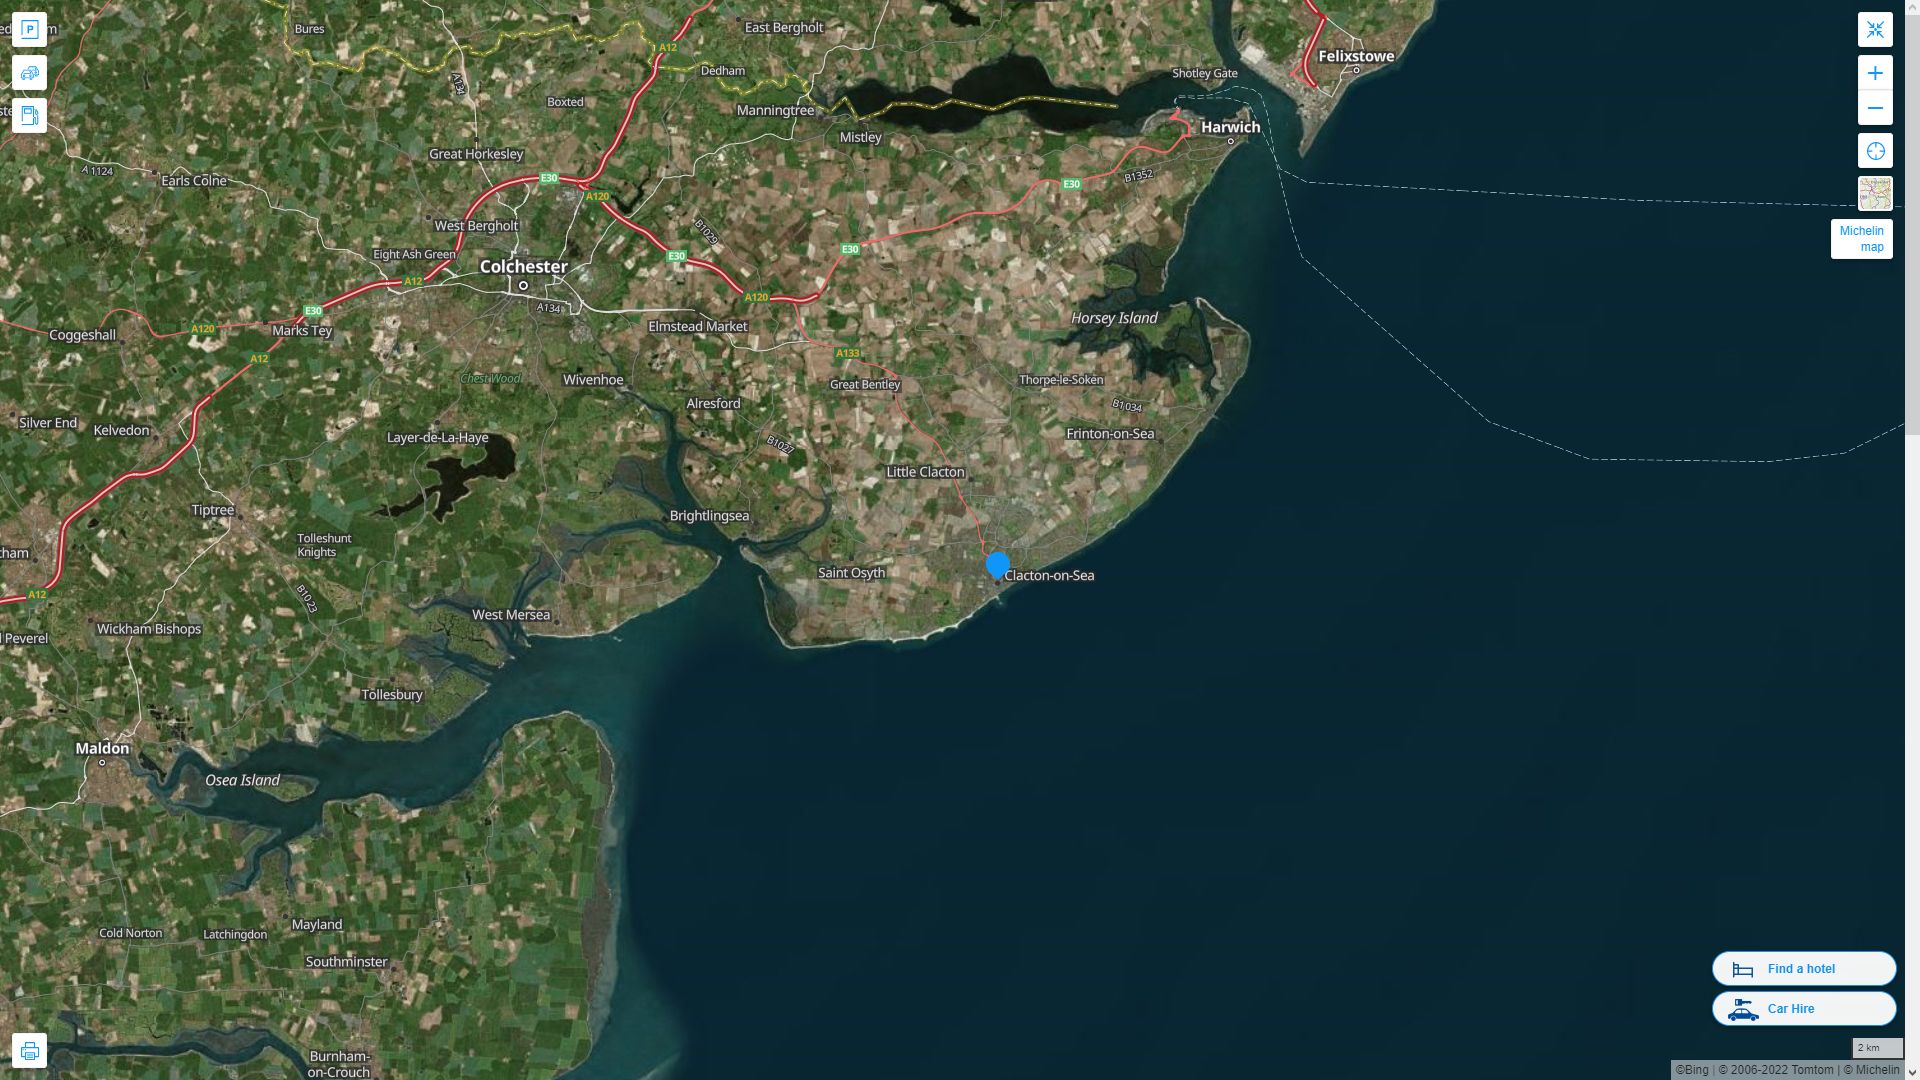 Clacton on Sea Highway and Road Map with Satellite View